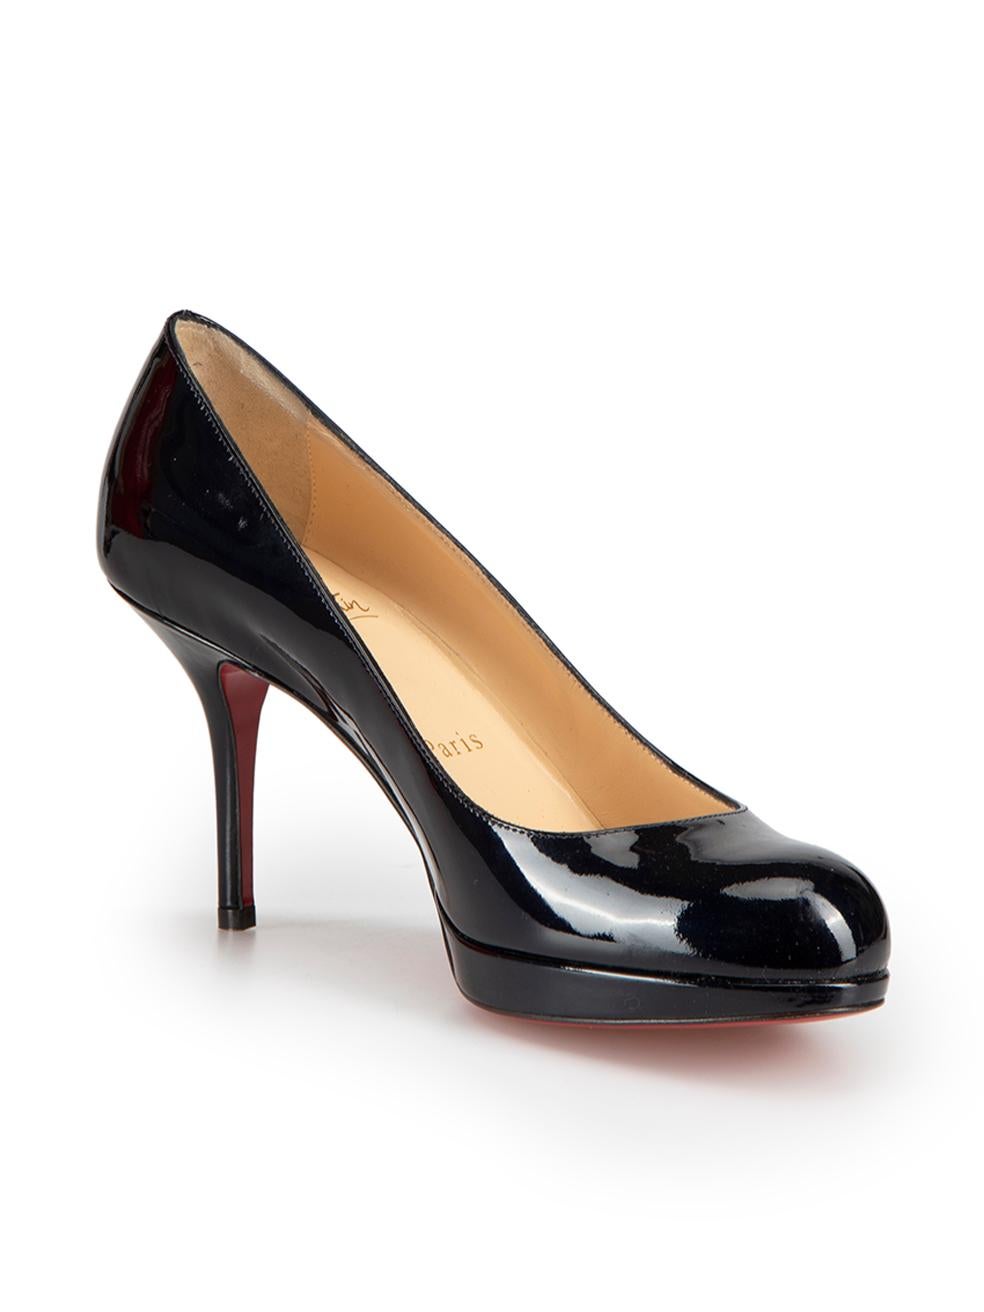 CONDITION is Very good. Hardly any visible wear to pumps is evident on this used Christian Louboutin designer resale item.



Details


Very dark navy undertone 

Patent leather

Slip-on pumps

Round-toe

Signature Christian Louboutin red